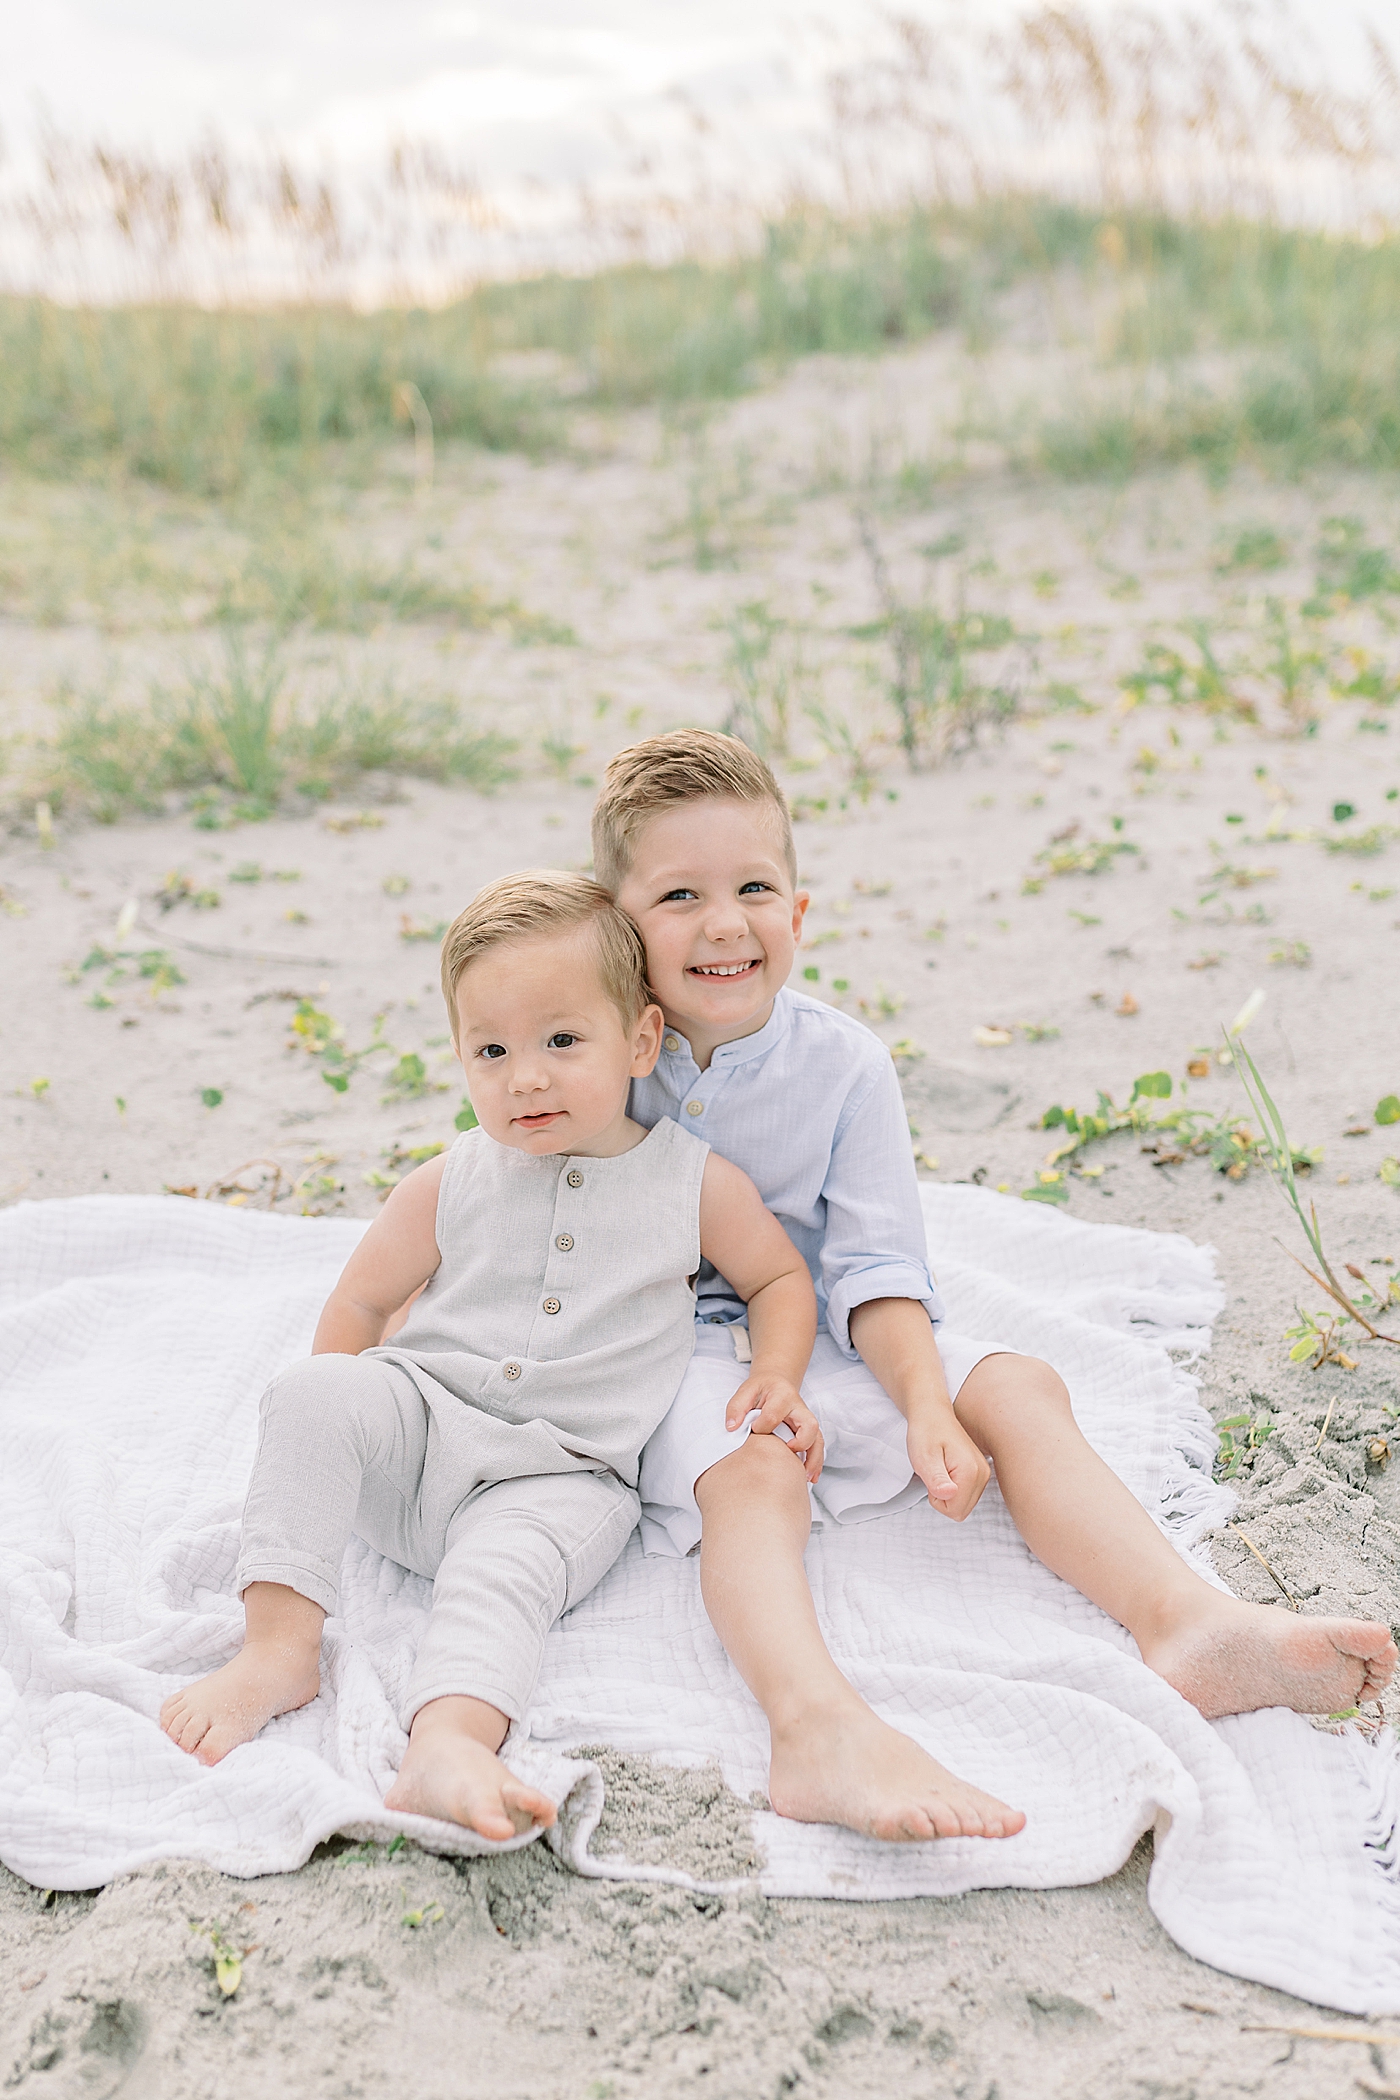 Brothers sitting on a beach blanket | Preparing for Family Beach Session with Caitlyn Motycka